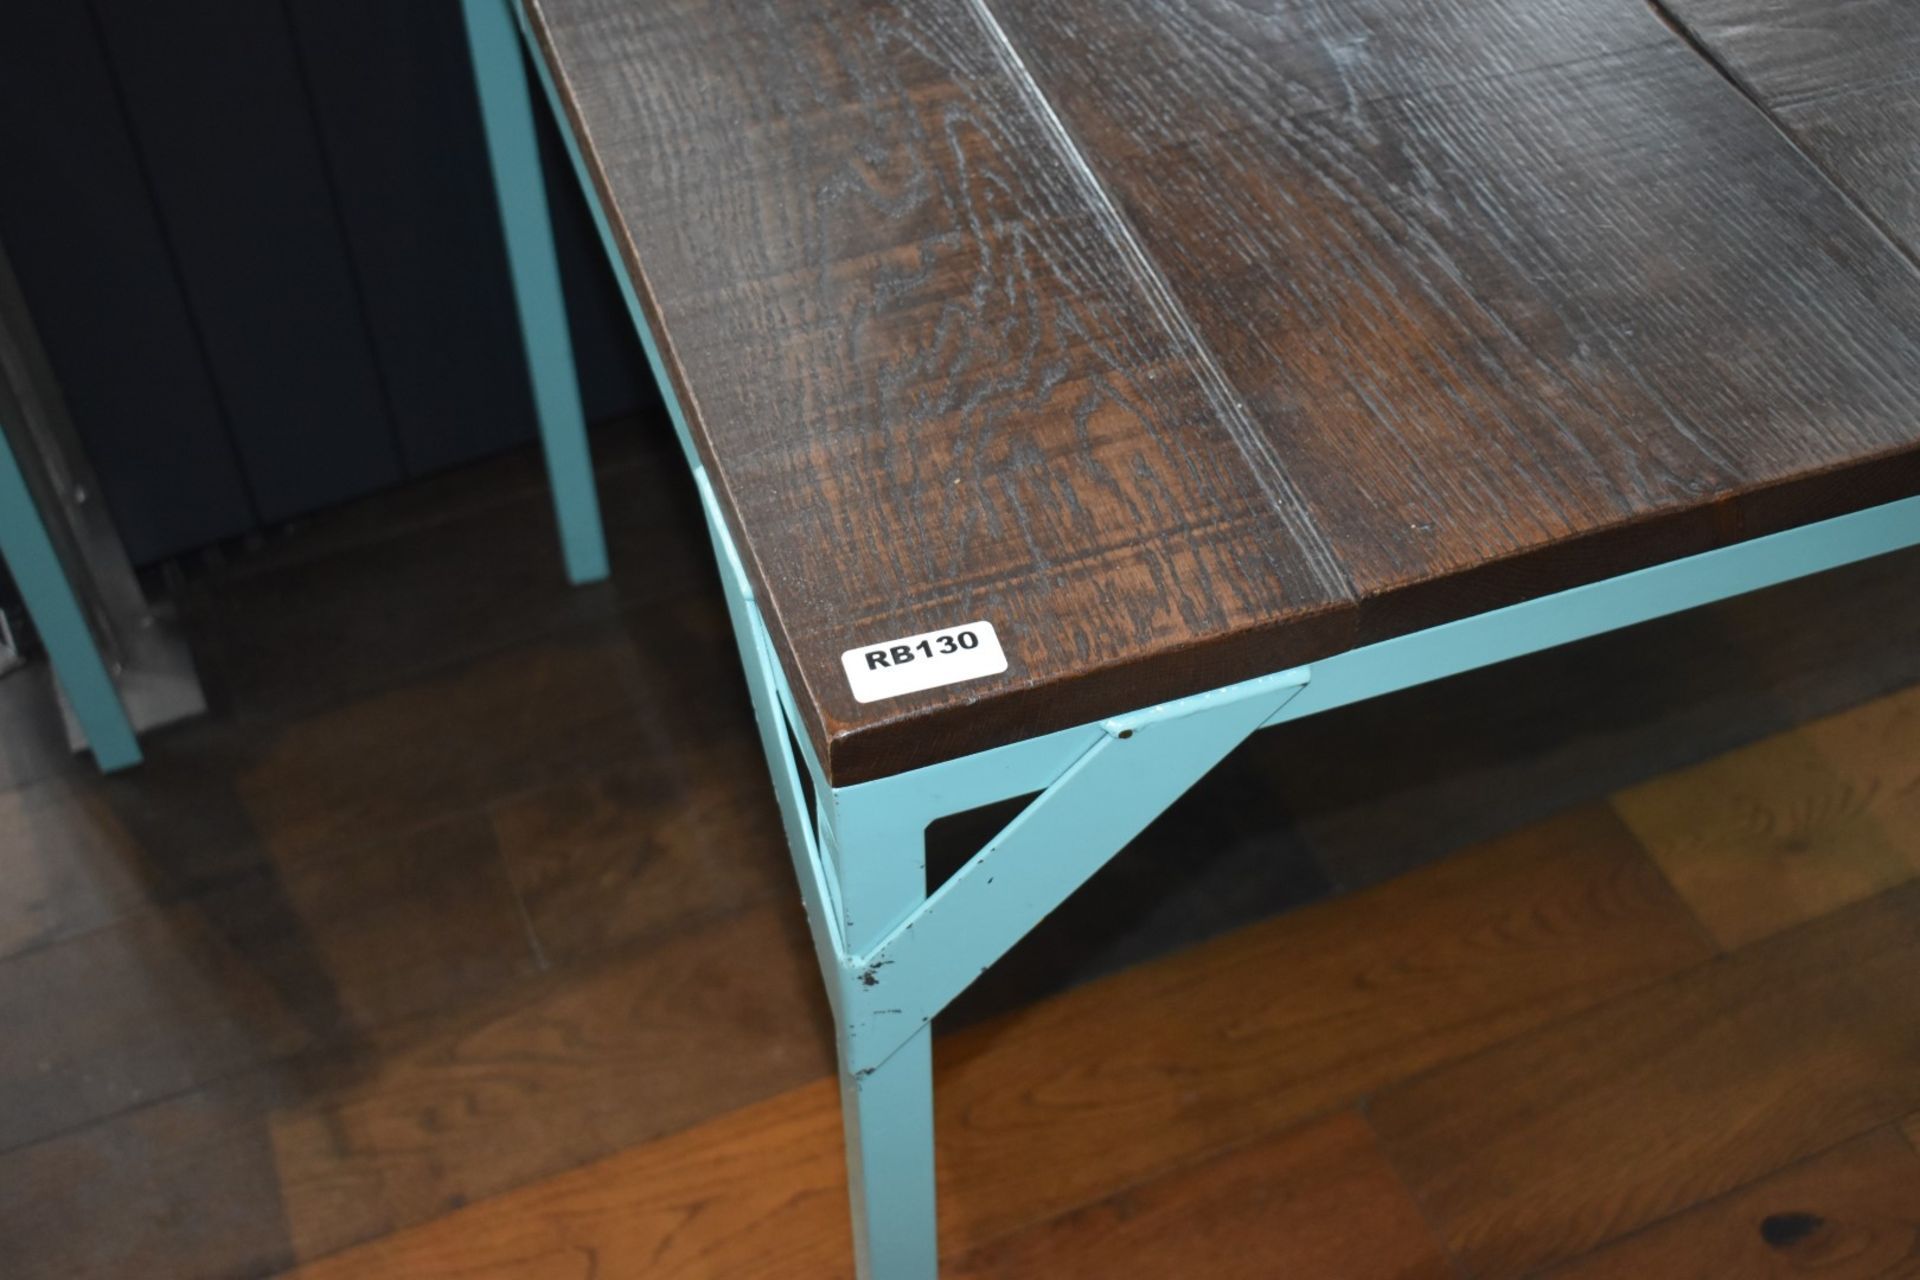 5 x Restaurant Dining Tables With Duck Egg Blue Steel Bases and Wooden Panelled Tops - Size: H77 - Image 4 of 4